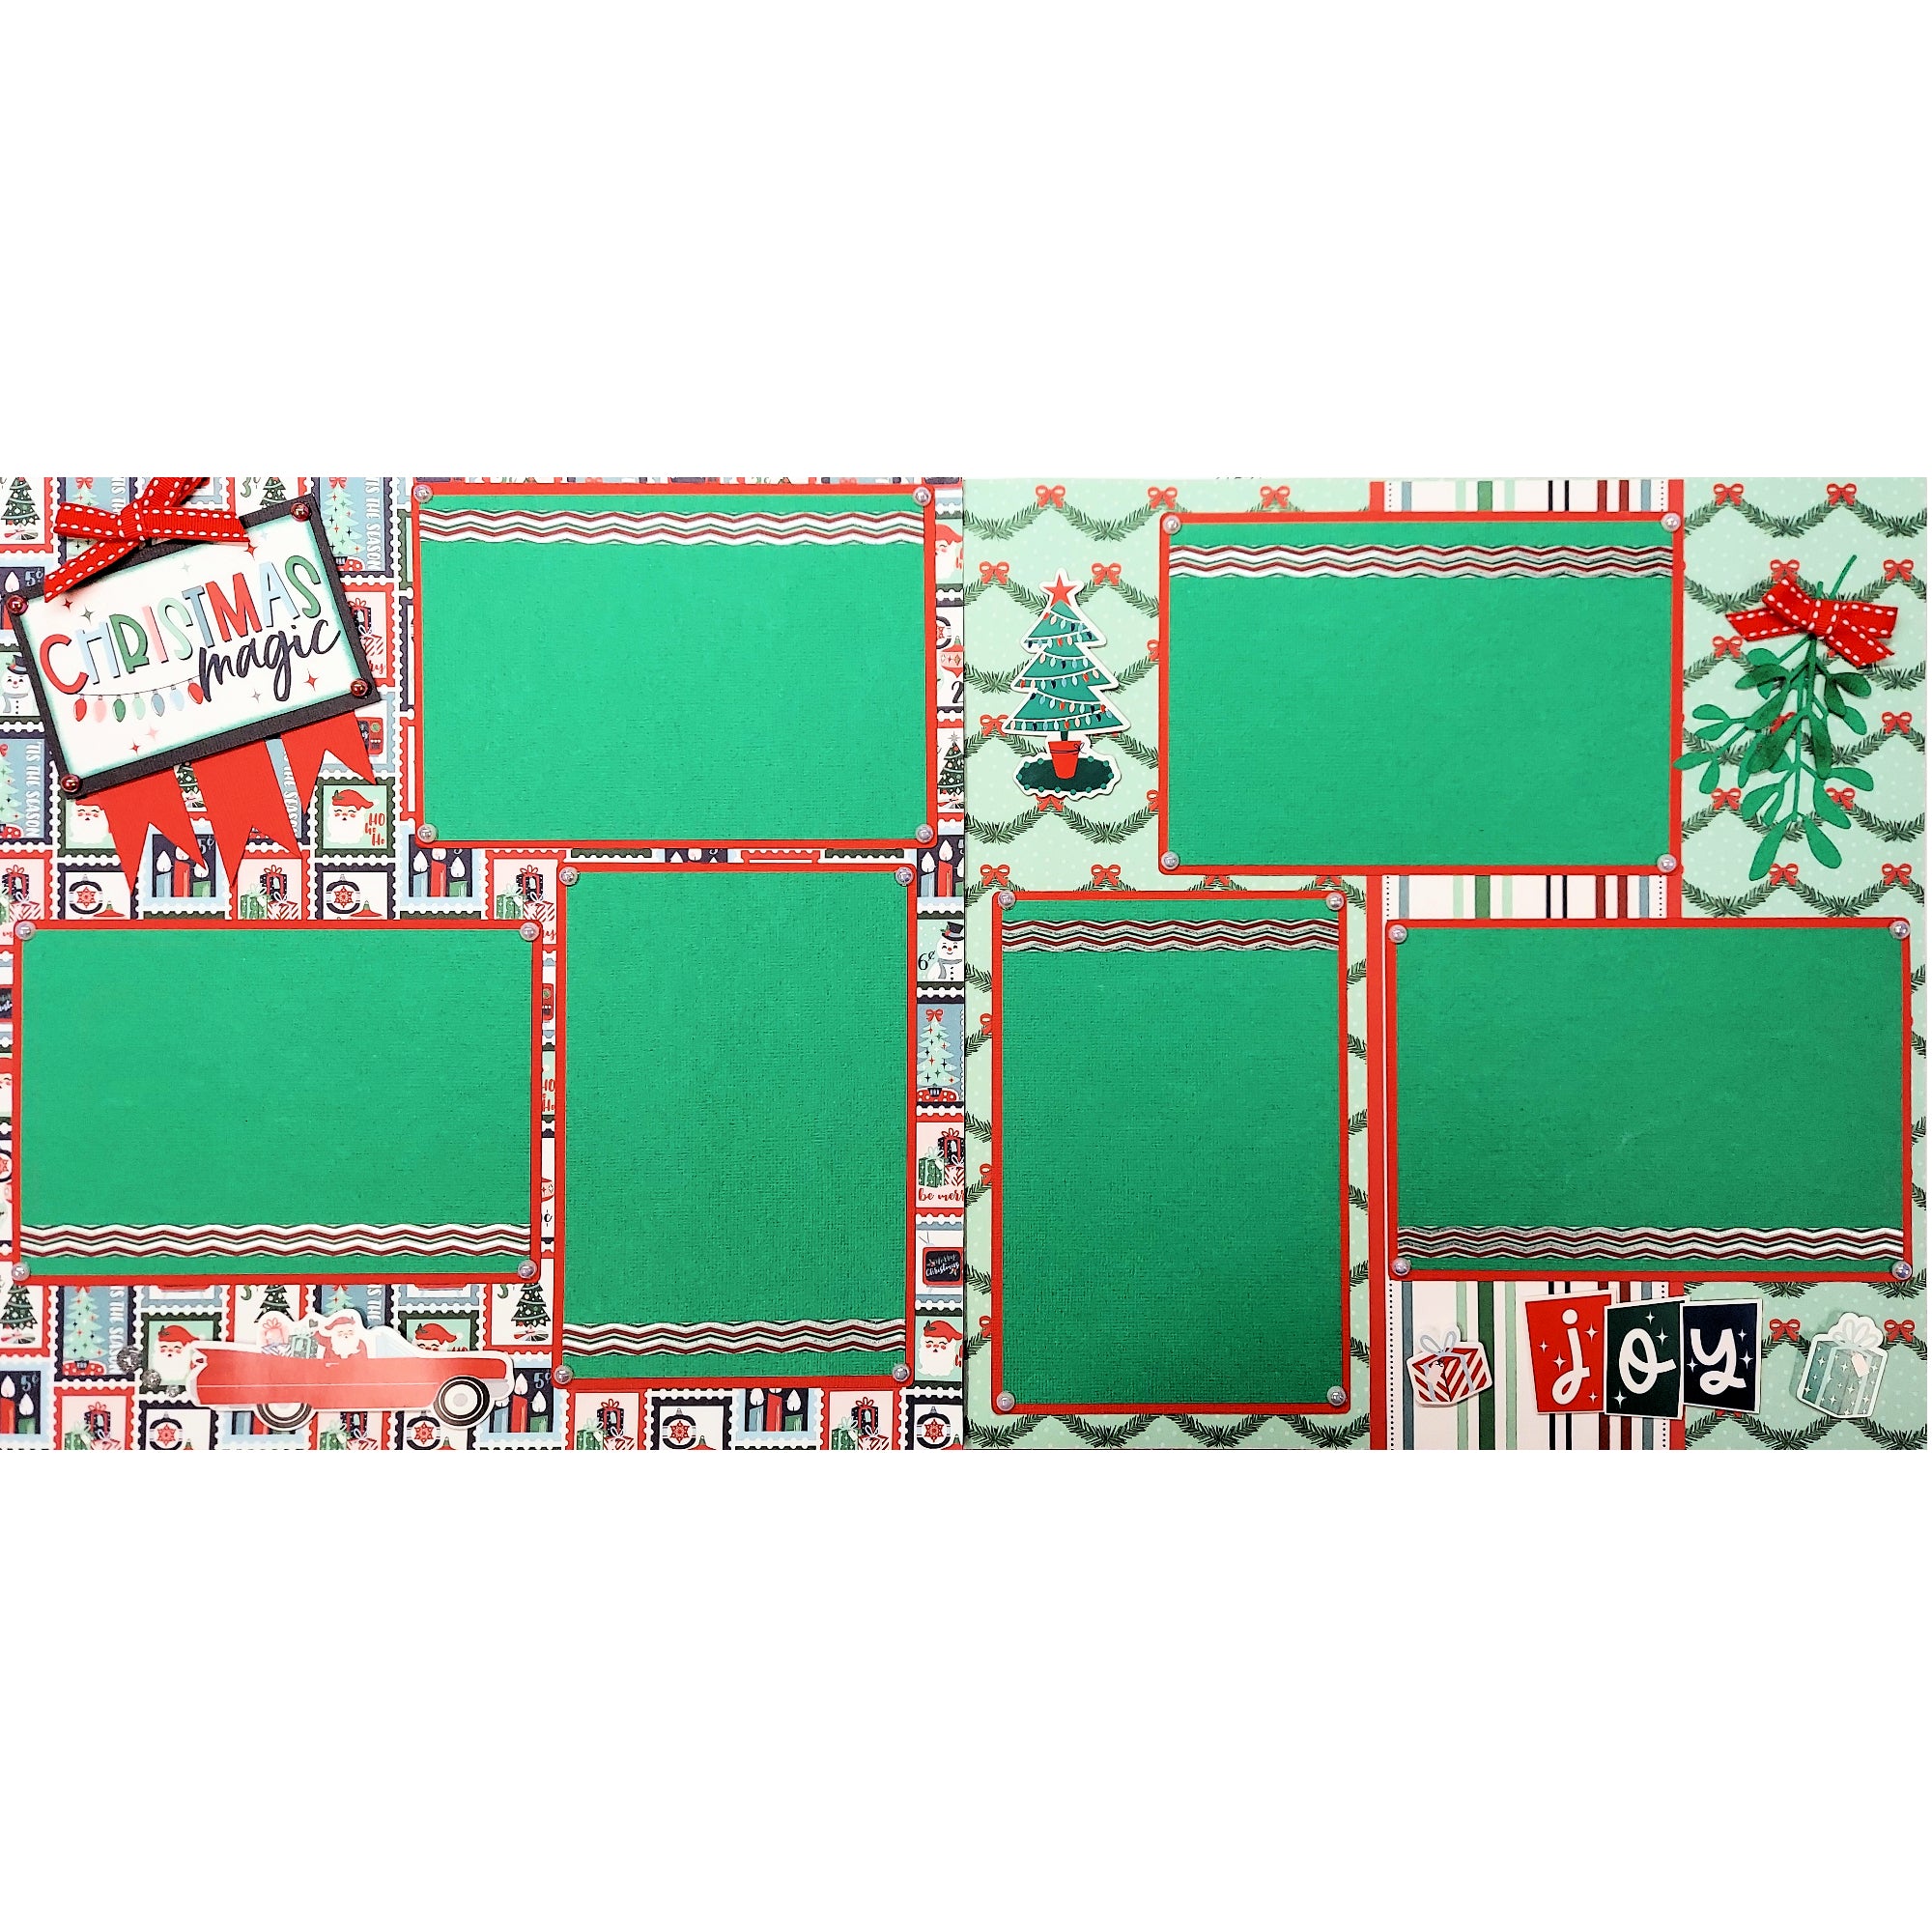 Christmas Magic  (2) - 12 x 12 Pages, Fully-Assembled & Hand-Crafted 3D Scrapbook Premade by SSC Designs